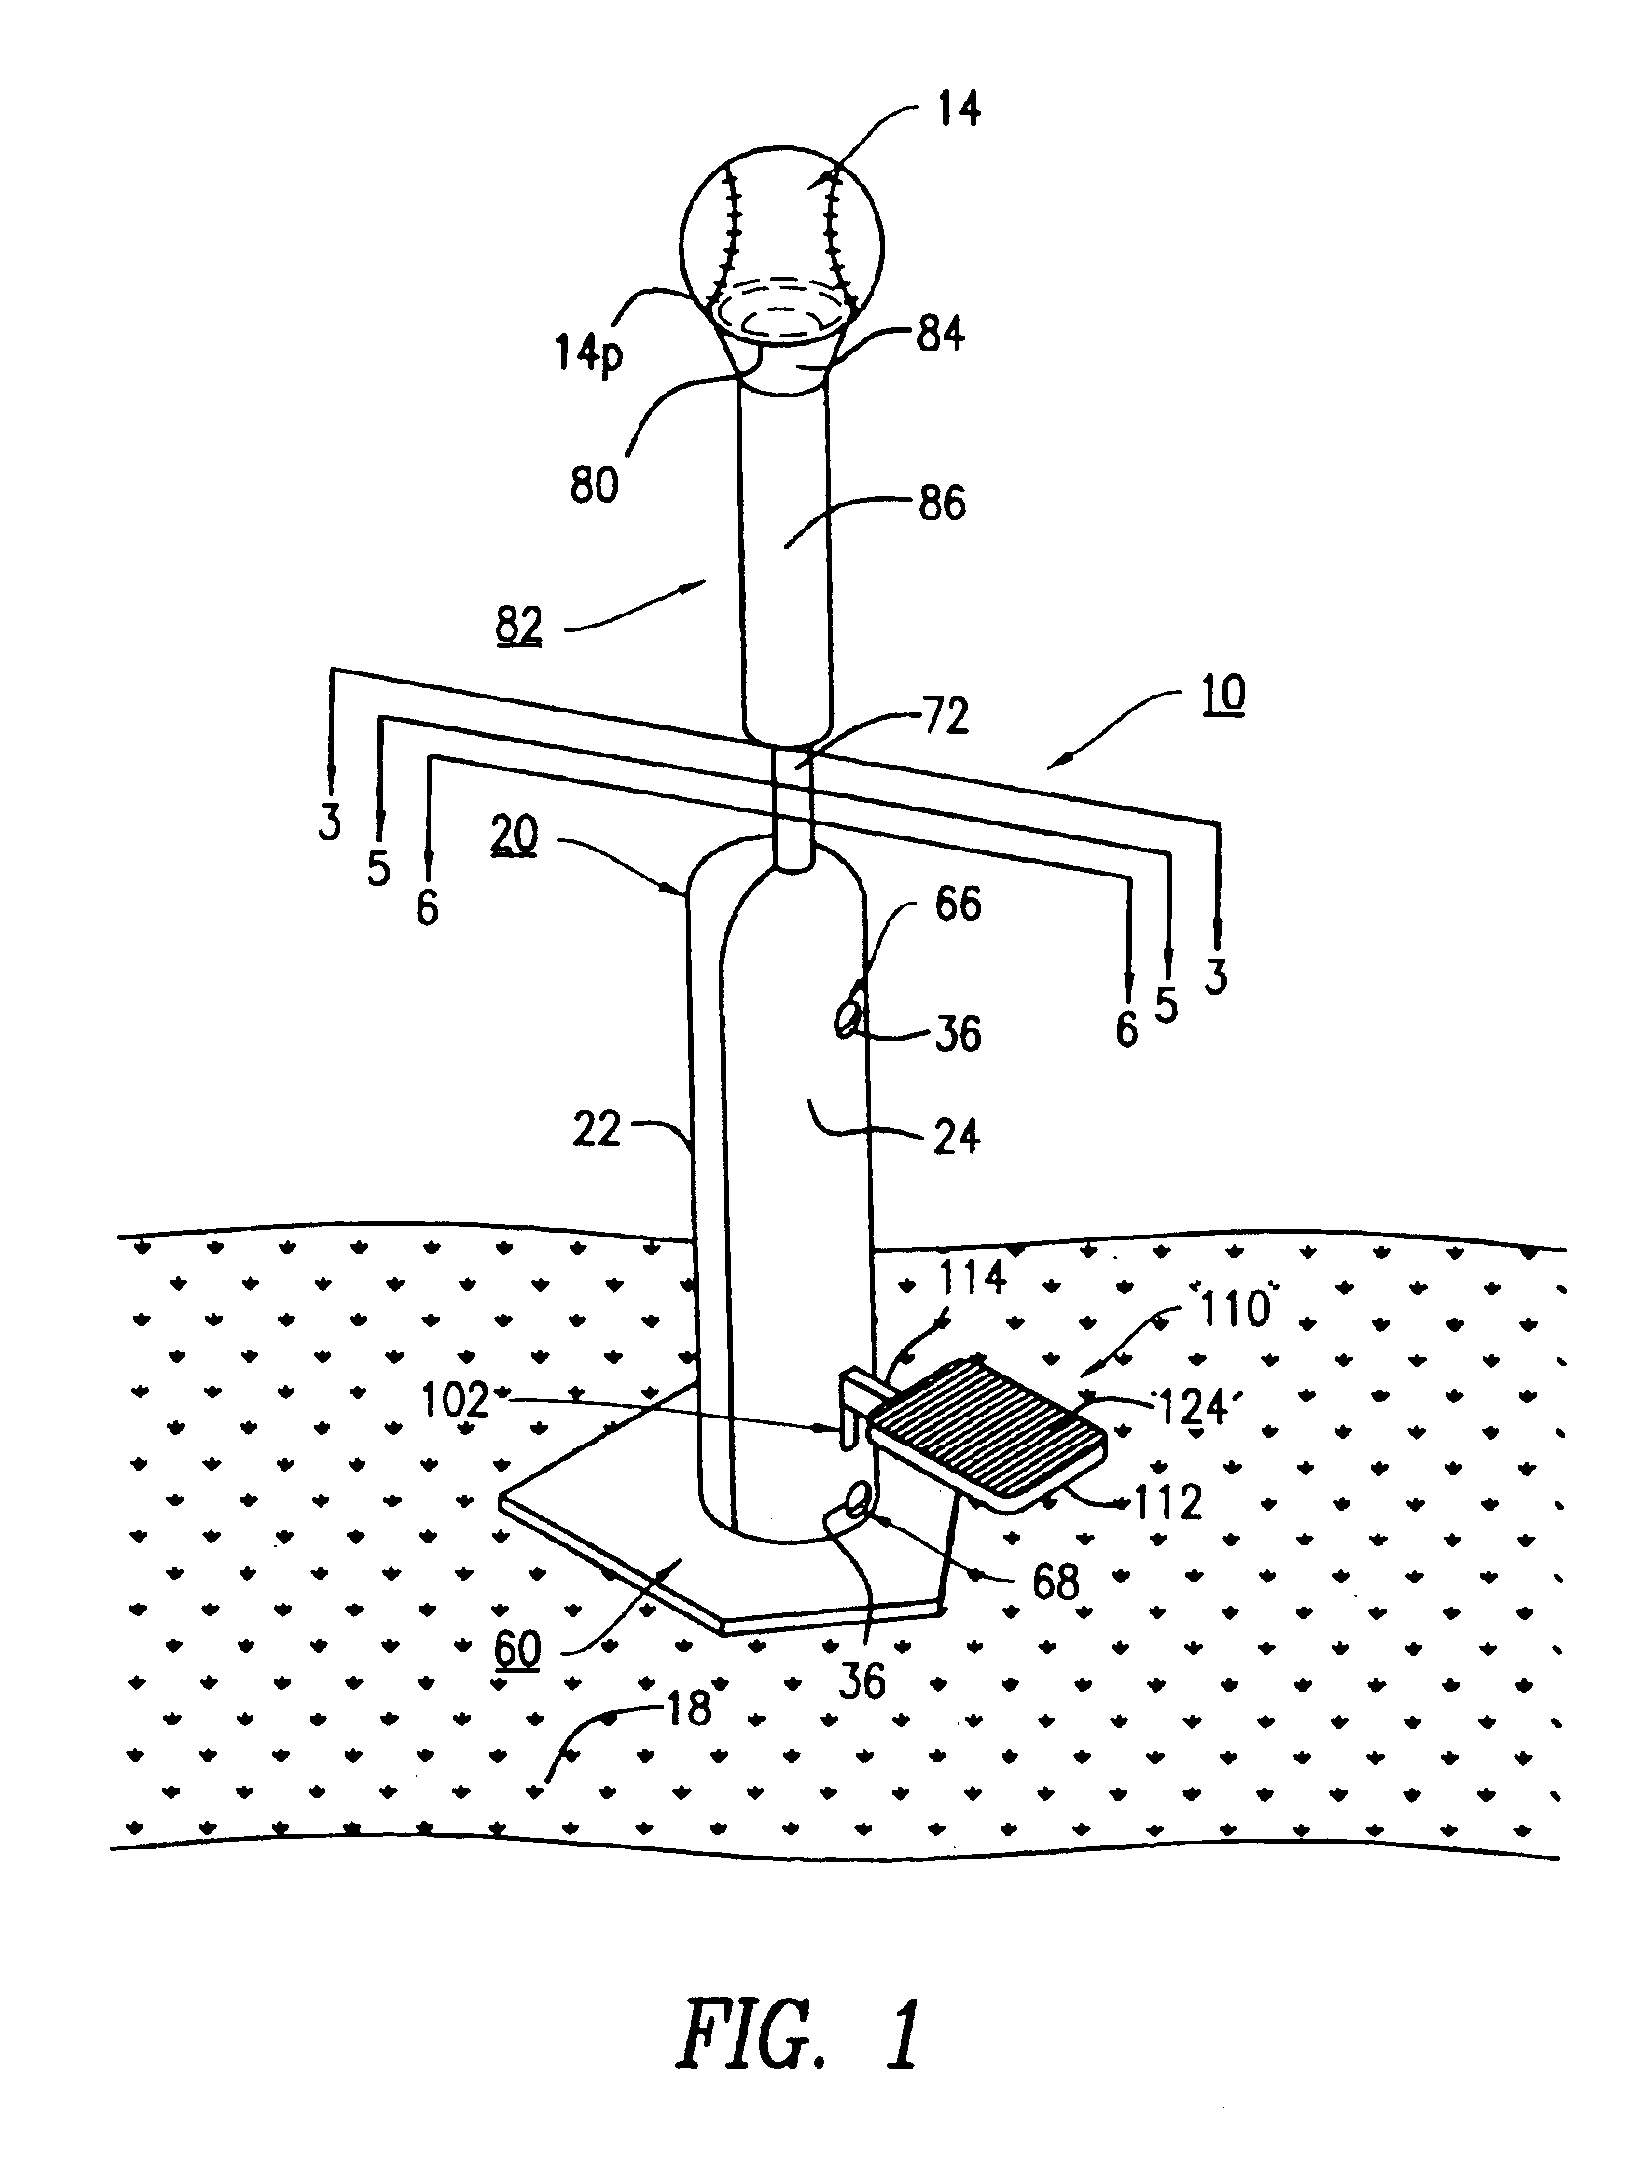 Baseball server apparatus with a delay timer element for providing a delaying time period for serving-up a baseball